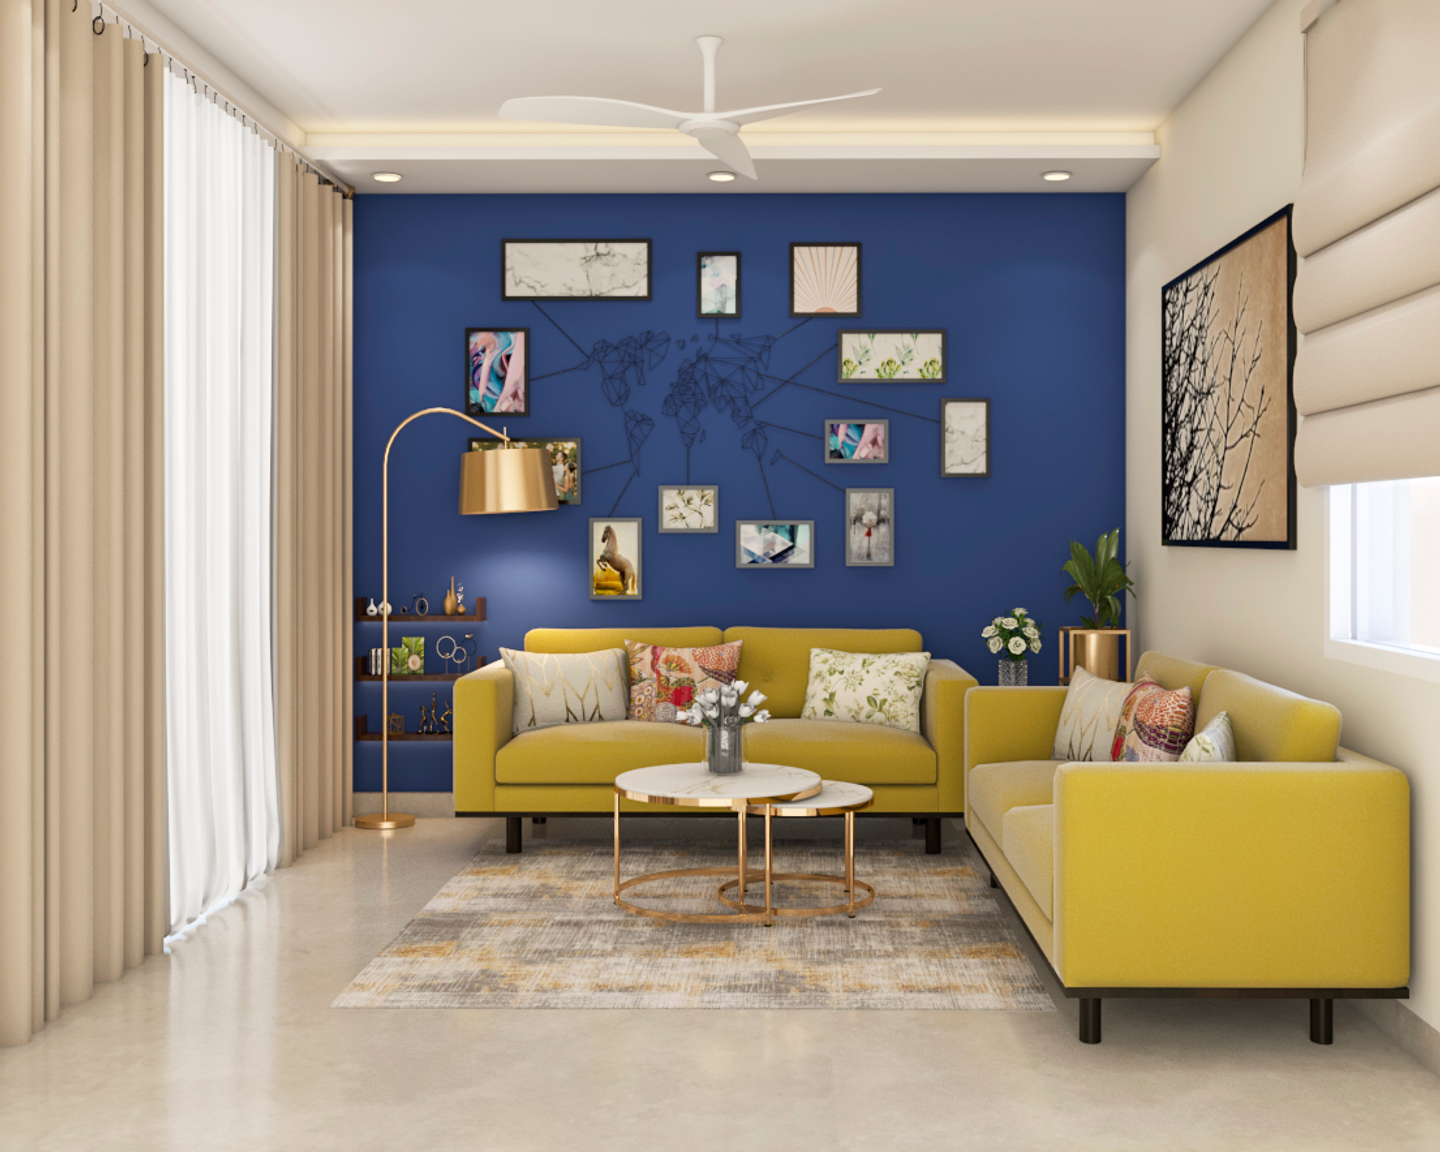 Living Room With Yellow And Blue - Livspace